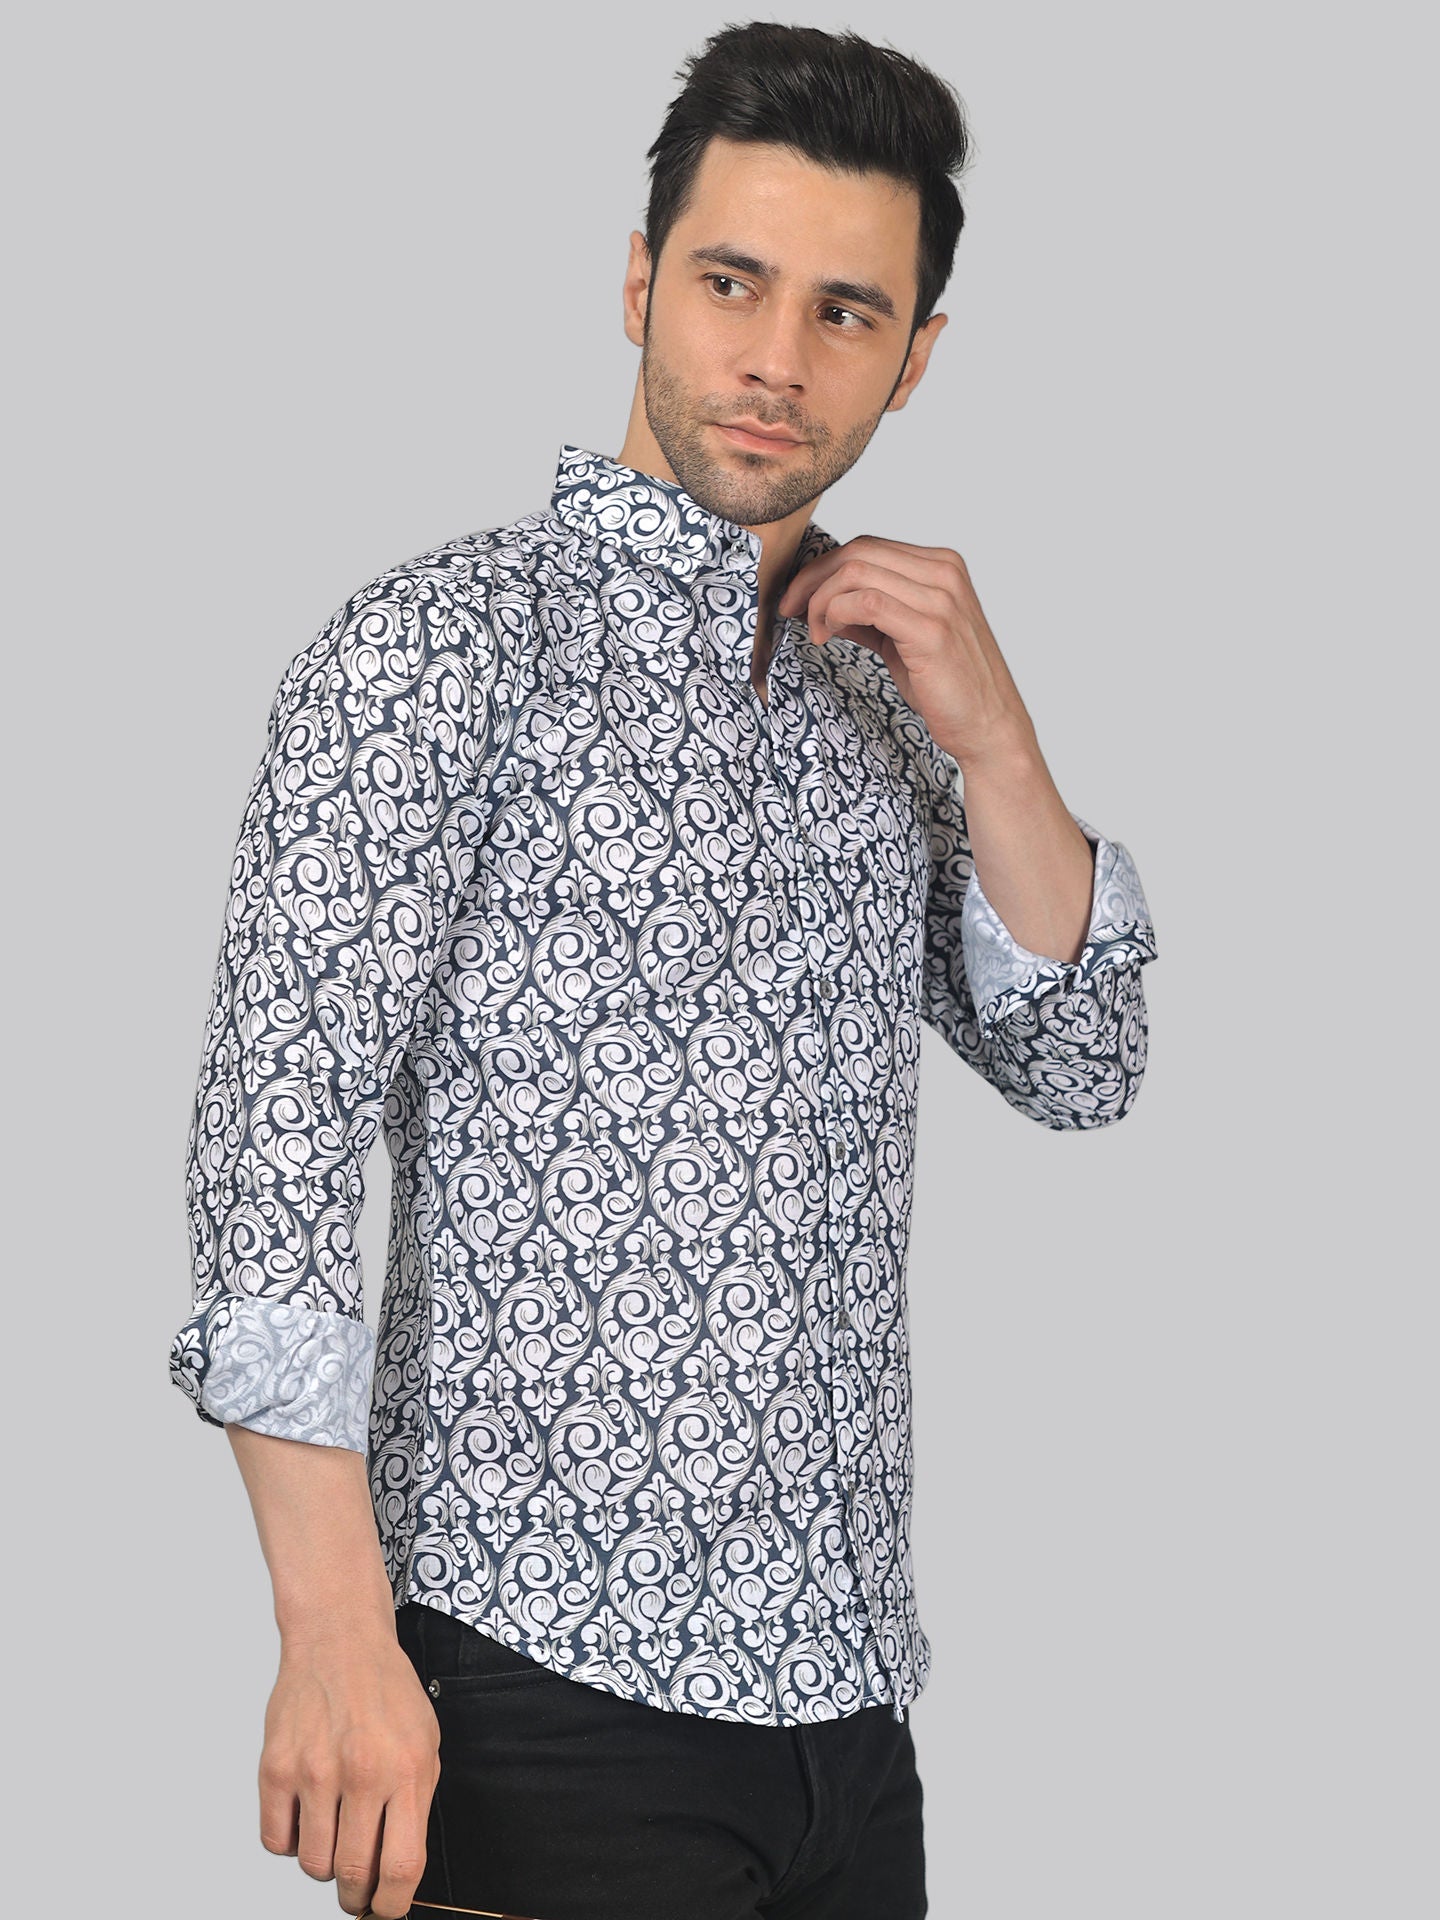 Edgy-glam Men's Printed Full Sleeve Casual Linen Shirt - TryBuy® USA🇺🇸